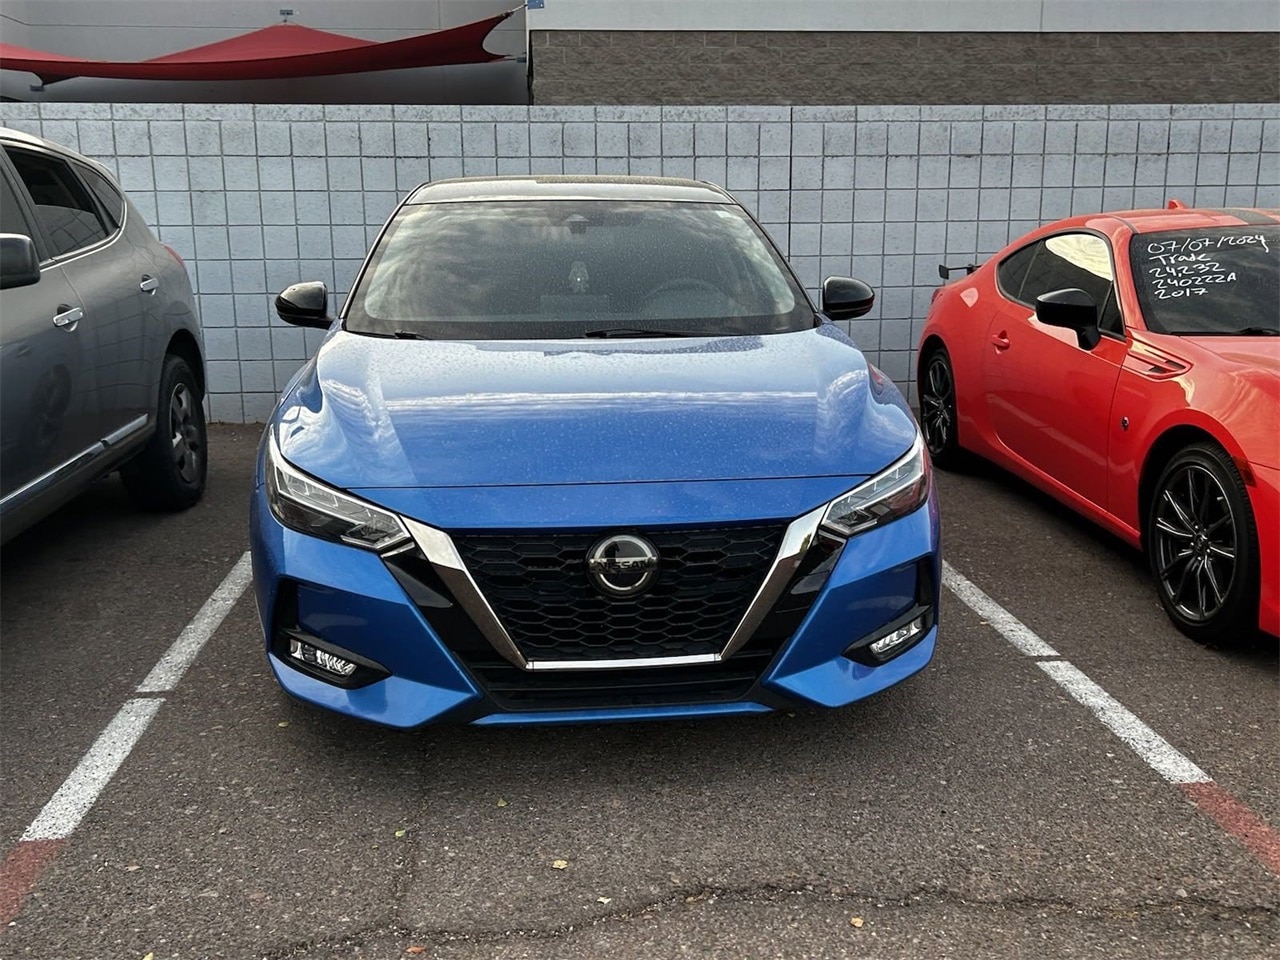 Used 2021 Nissan Sentra SR with VIN 3N1AB8DV4MY266302 for sale in Phoenix, AZ